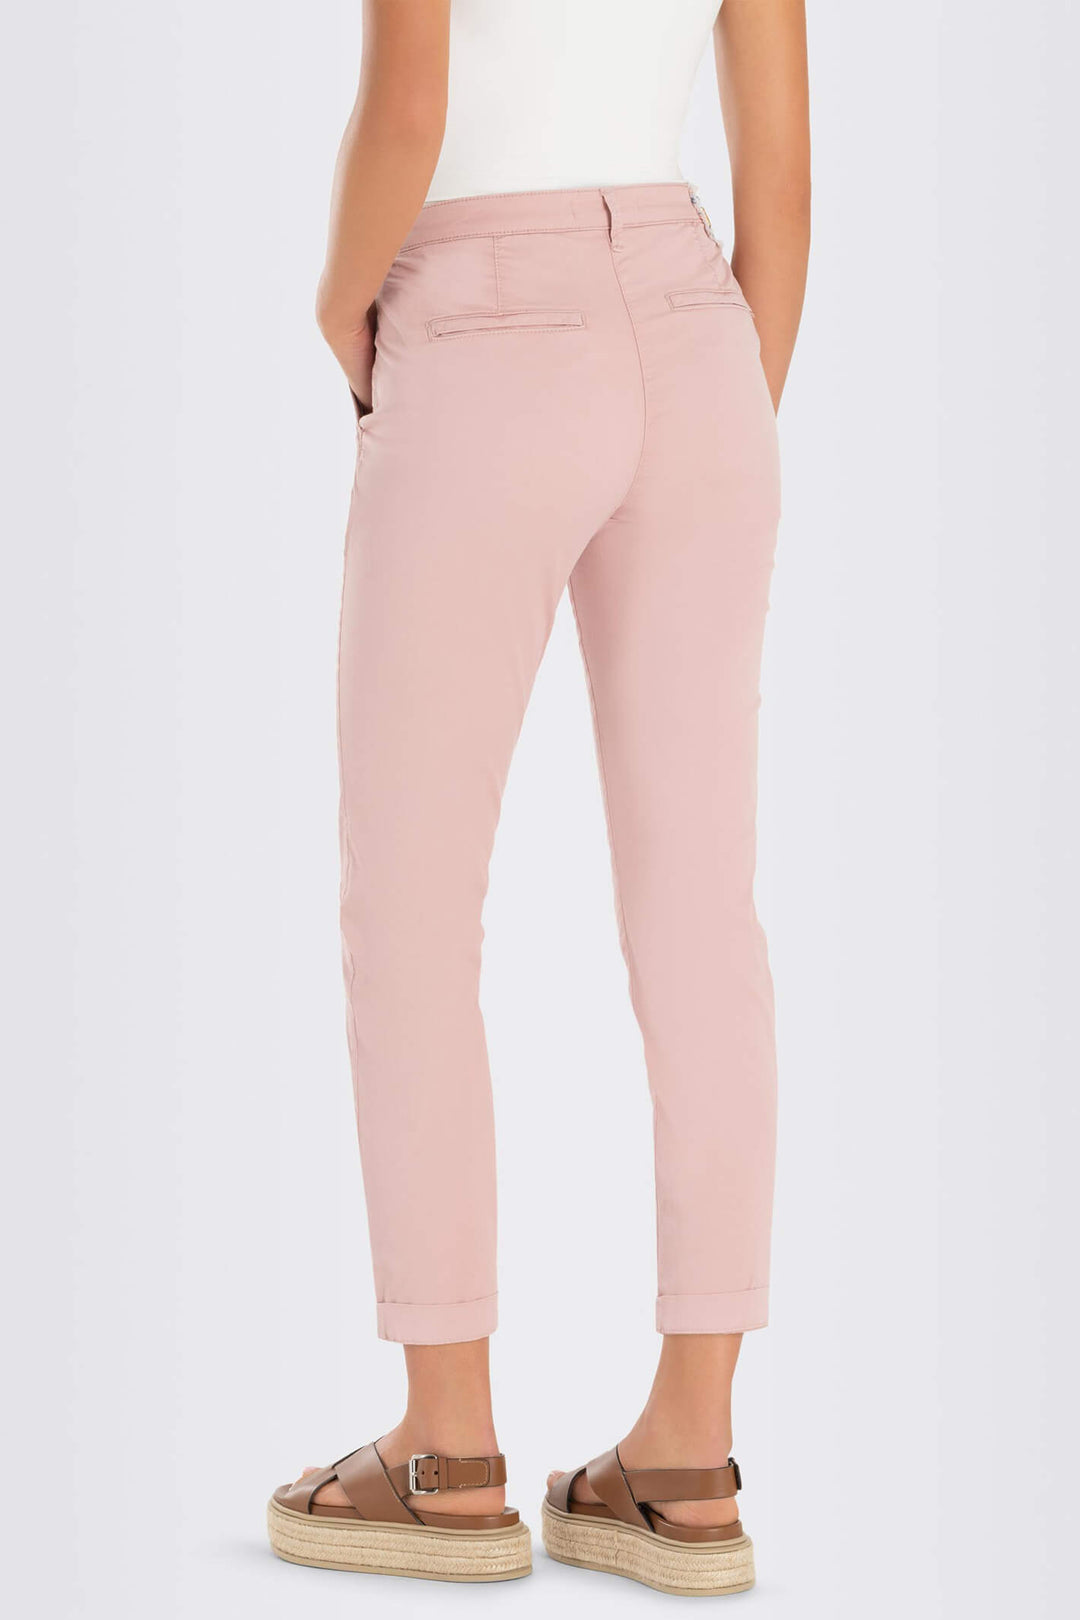 MAC 0434L 3075-00 427R Light Amethyst Pink Chino Turn Up Trousers - Shirley Allum Boutique